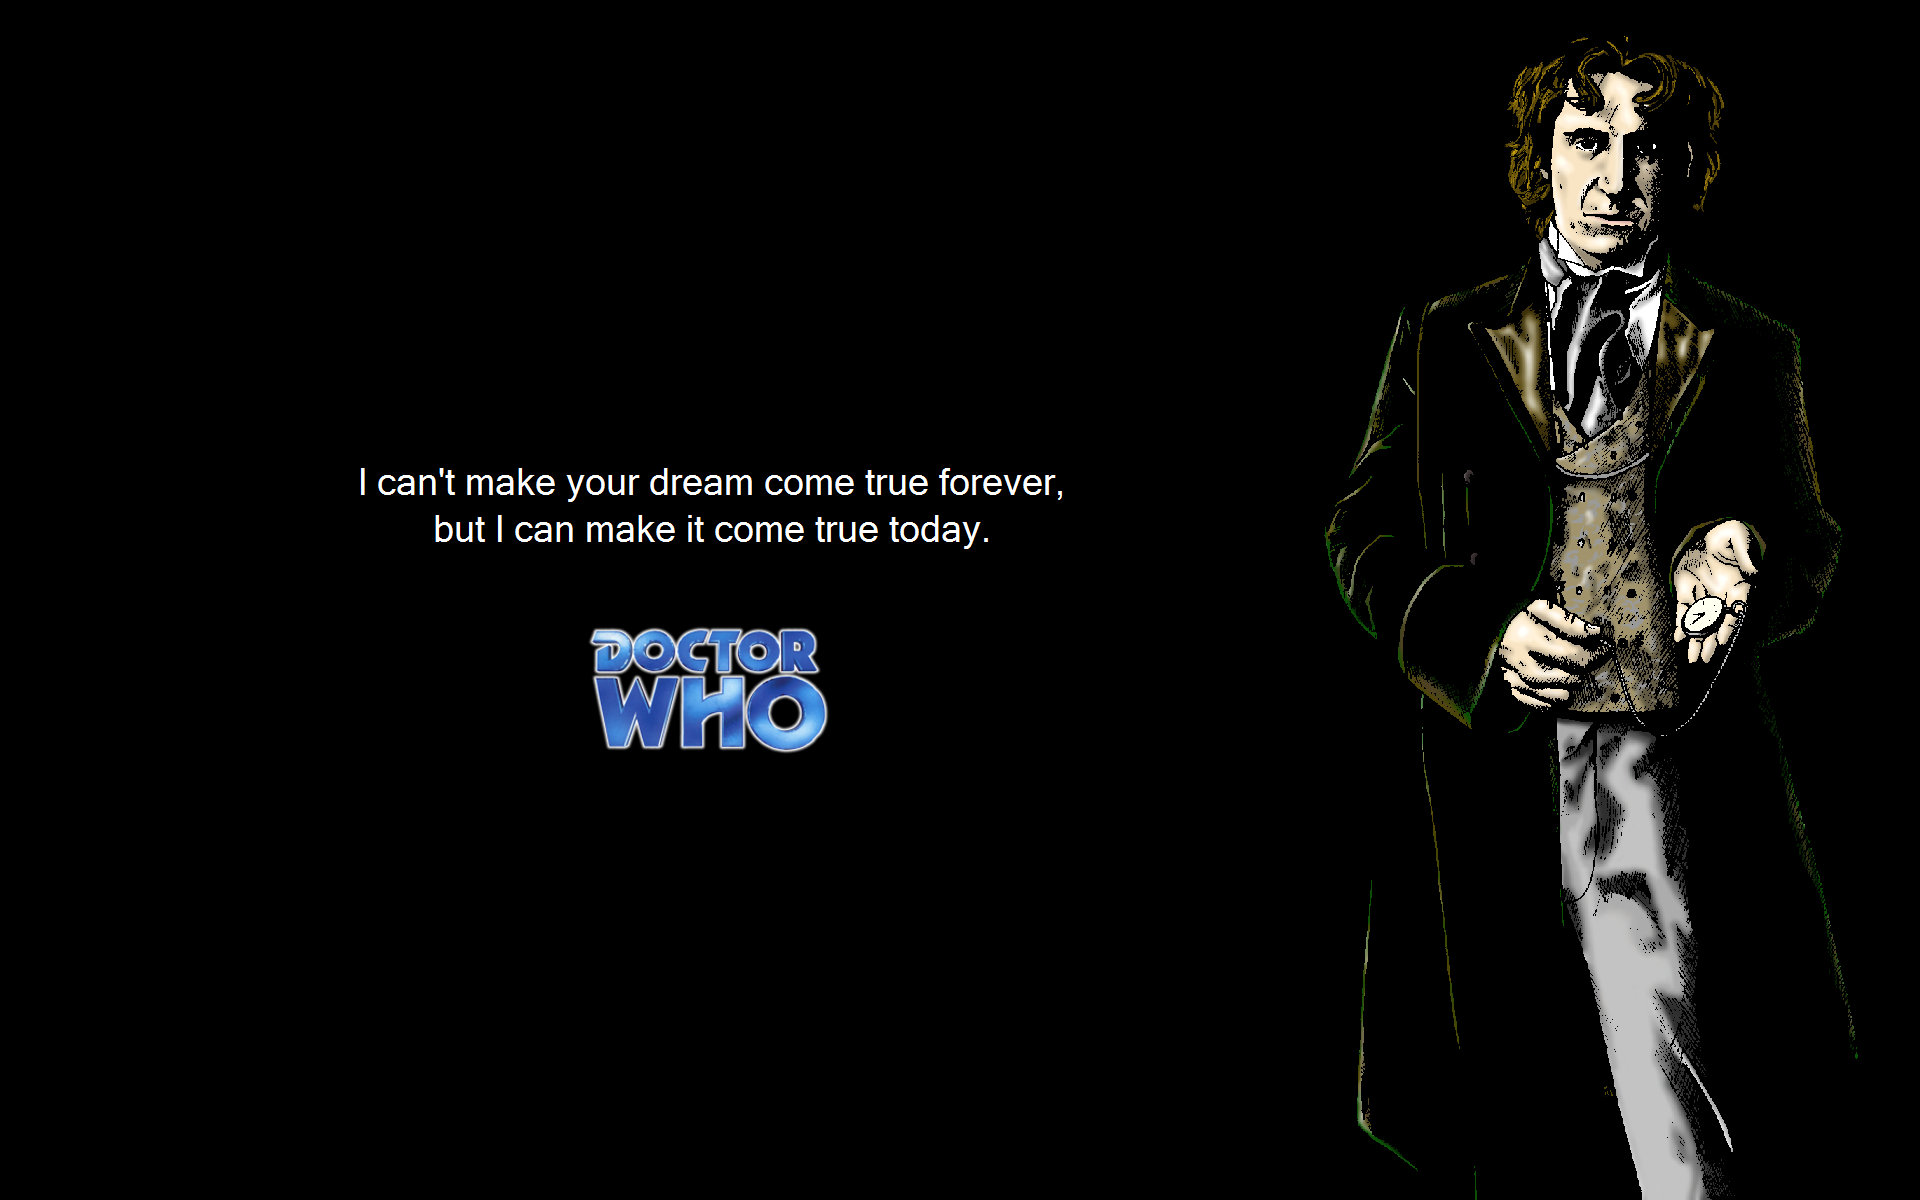 quotes, Paul McGann, Doctor Who, Eighth Doctor - desktop wallpaper